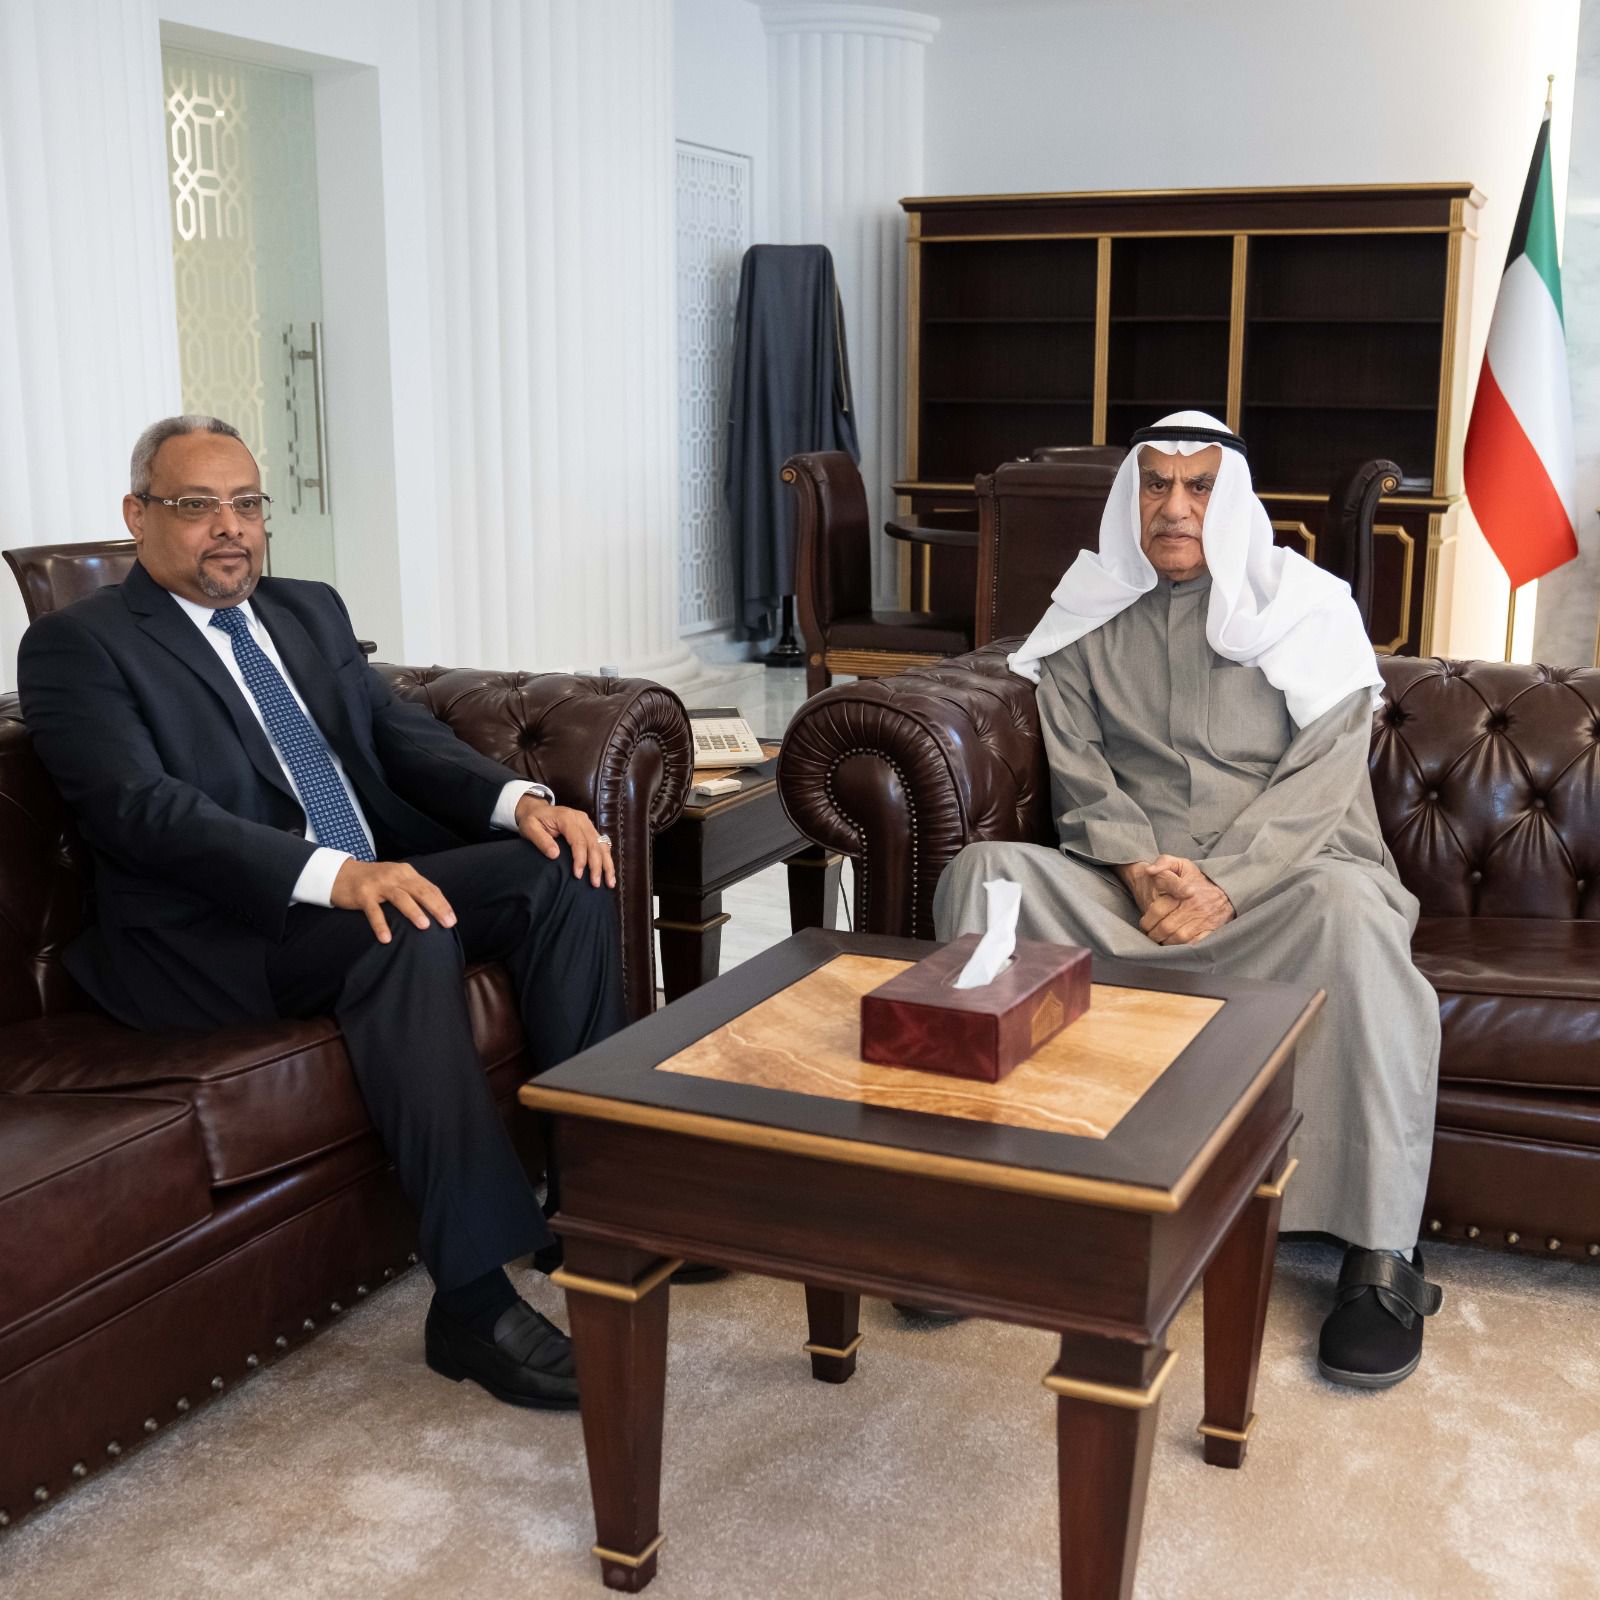 The meeting of His Excellency the Ambassador with the Speaker of the National Assembly